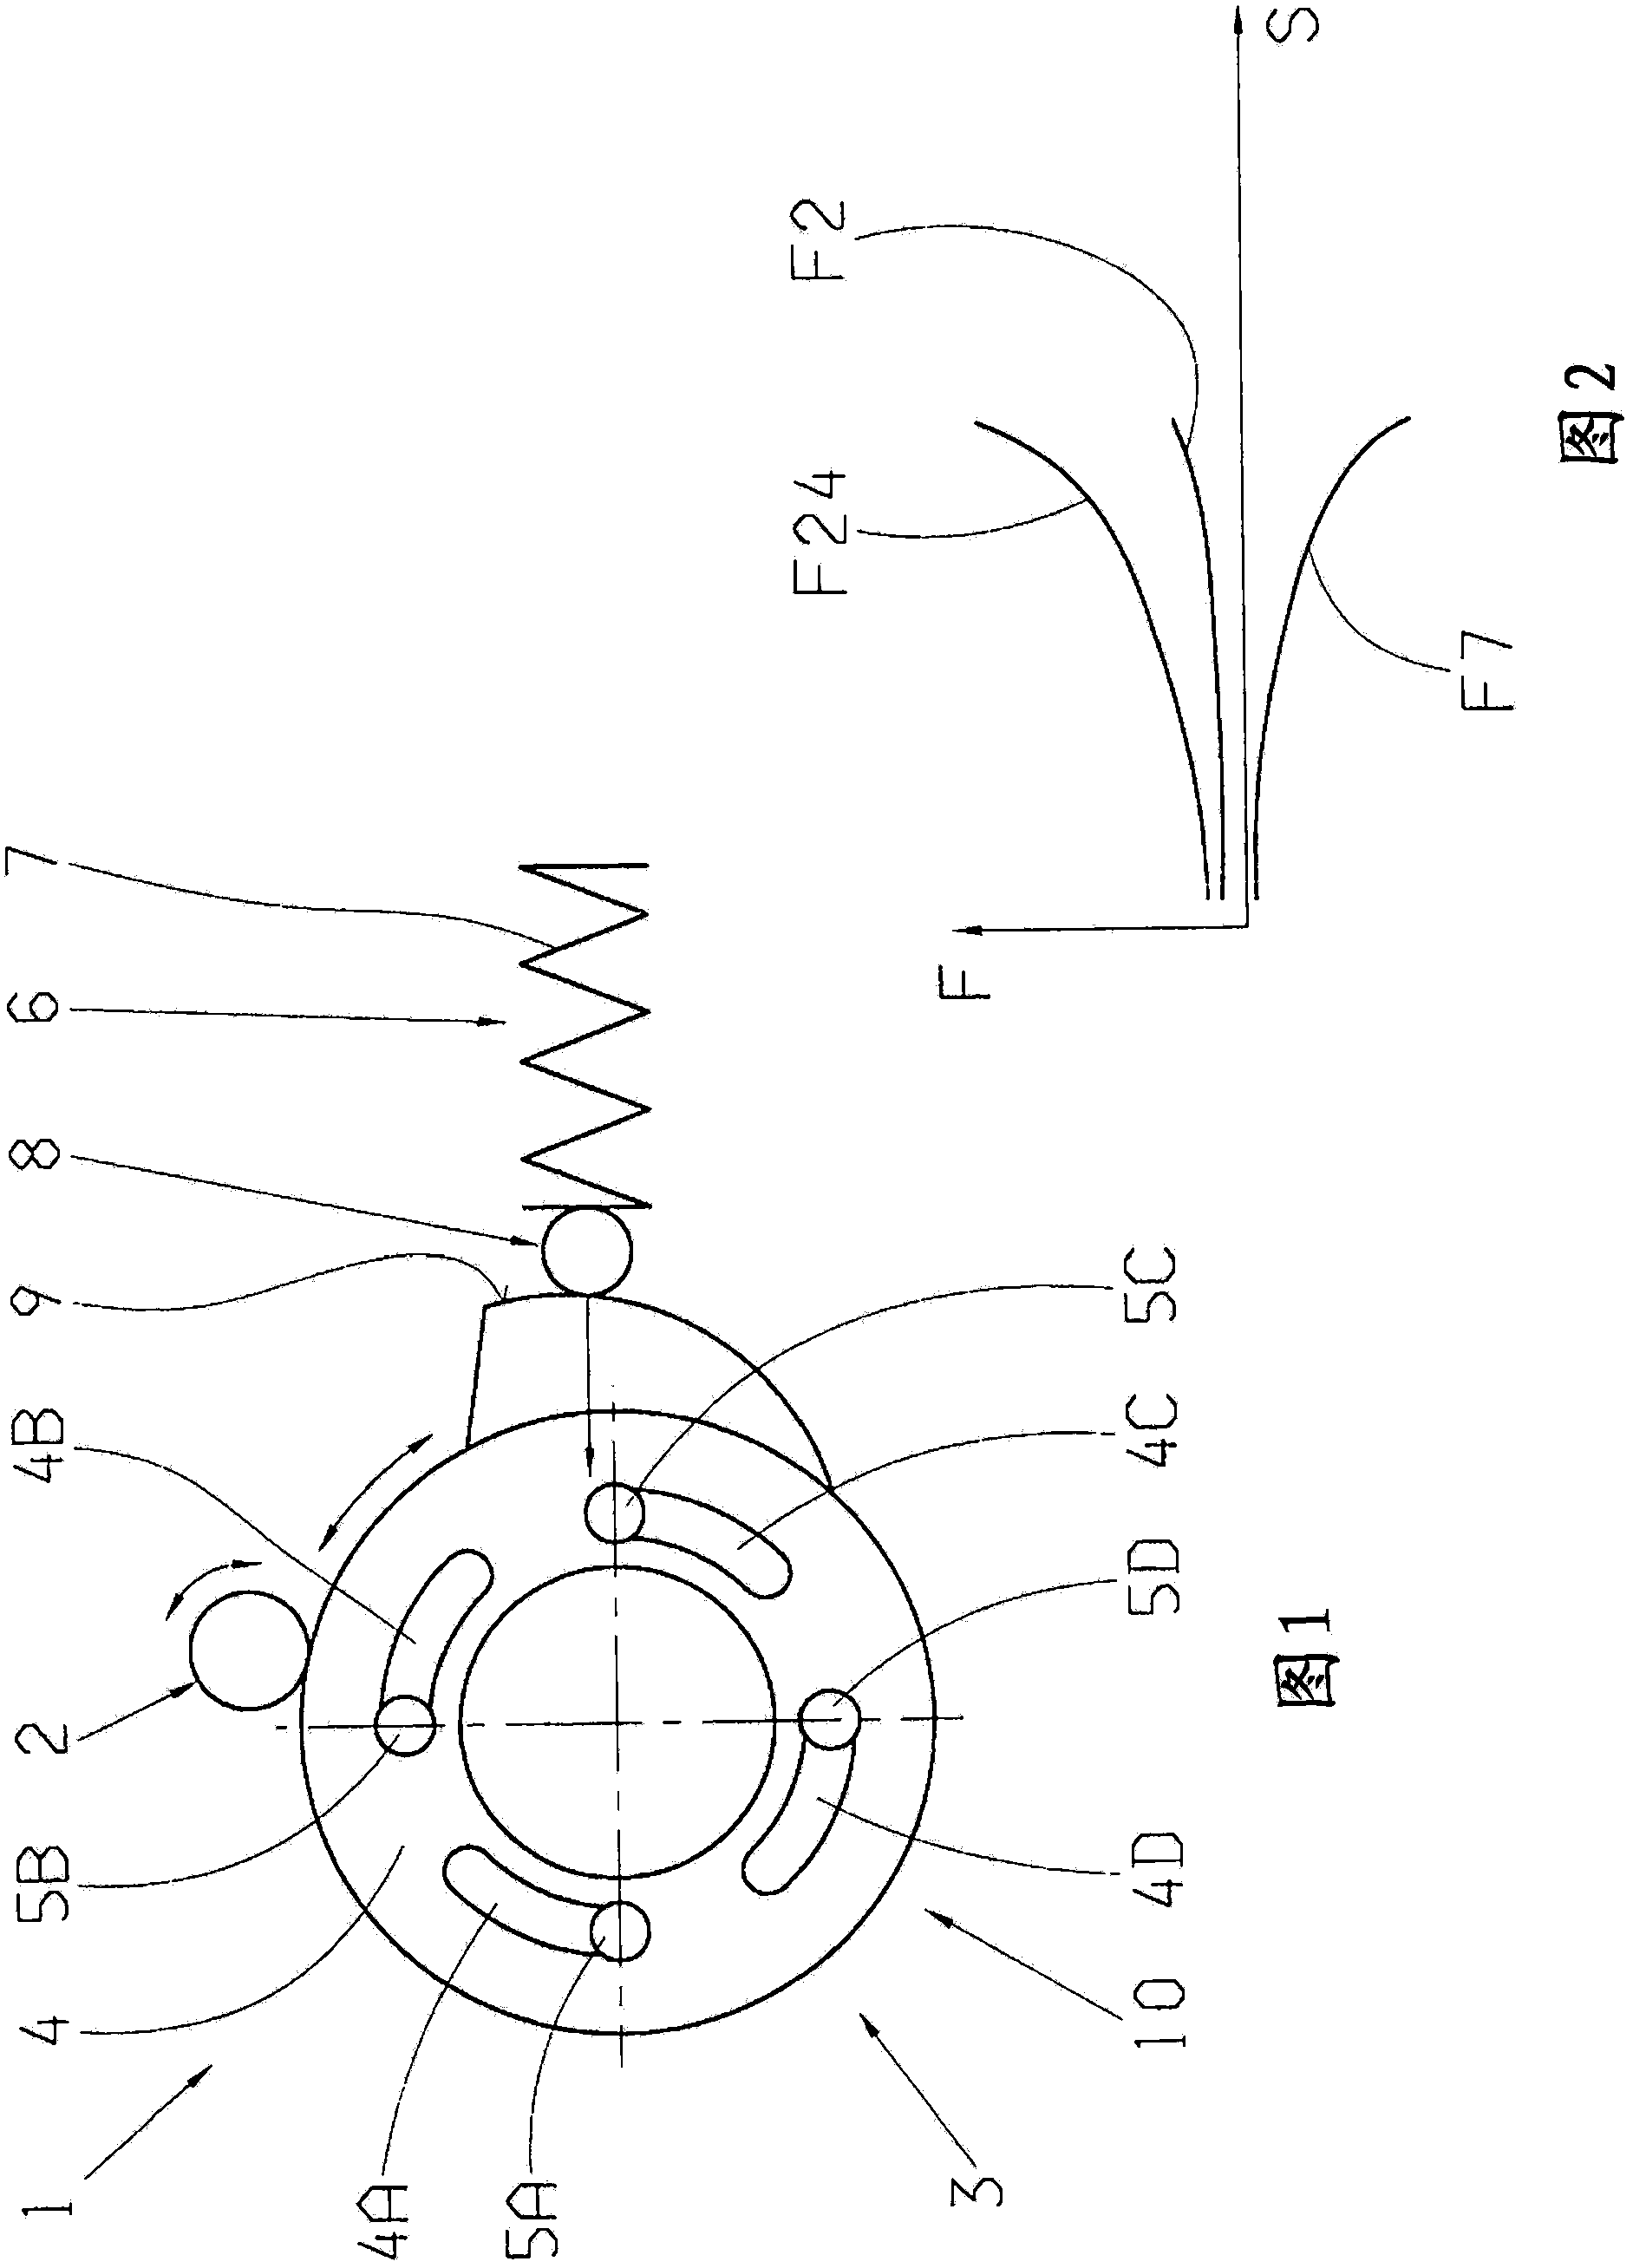 Device for changing an operating state of at least one switch element